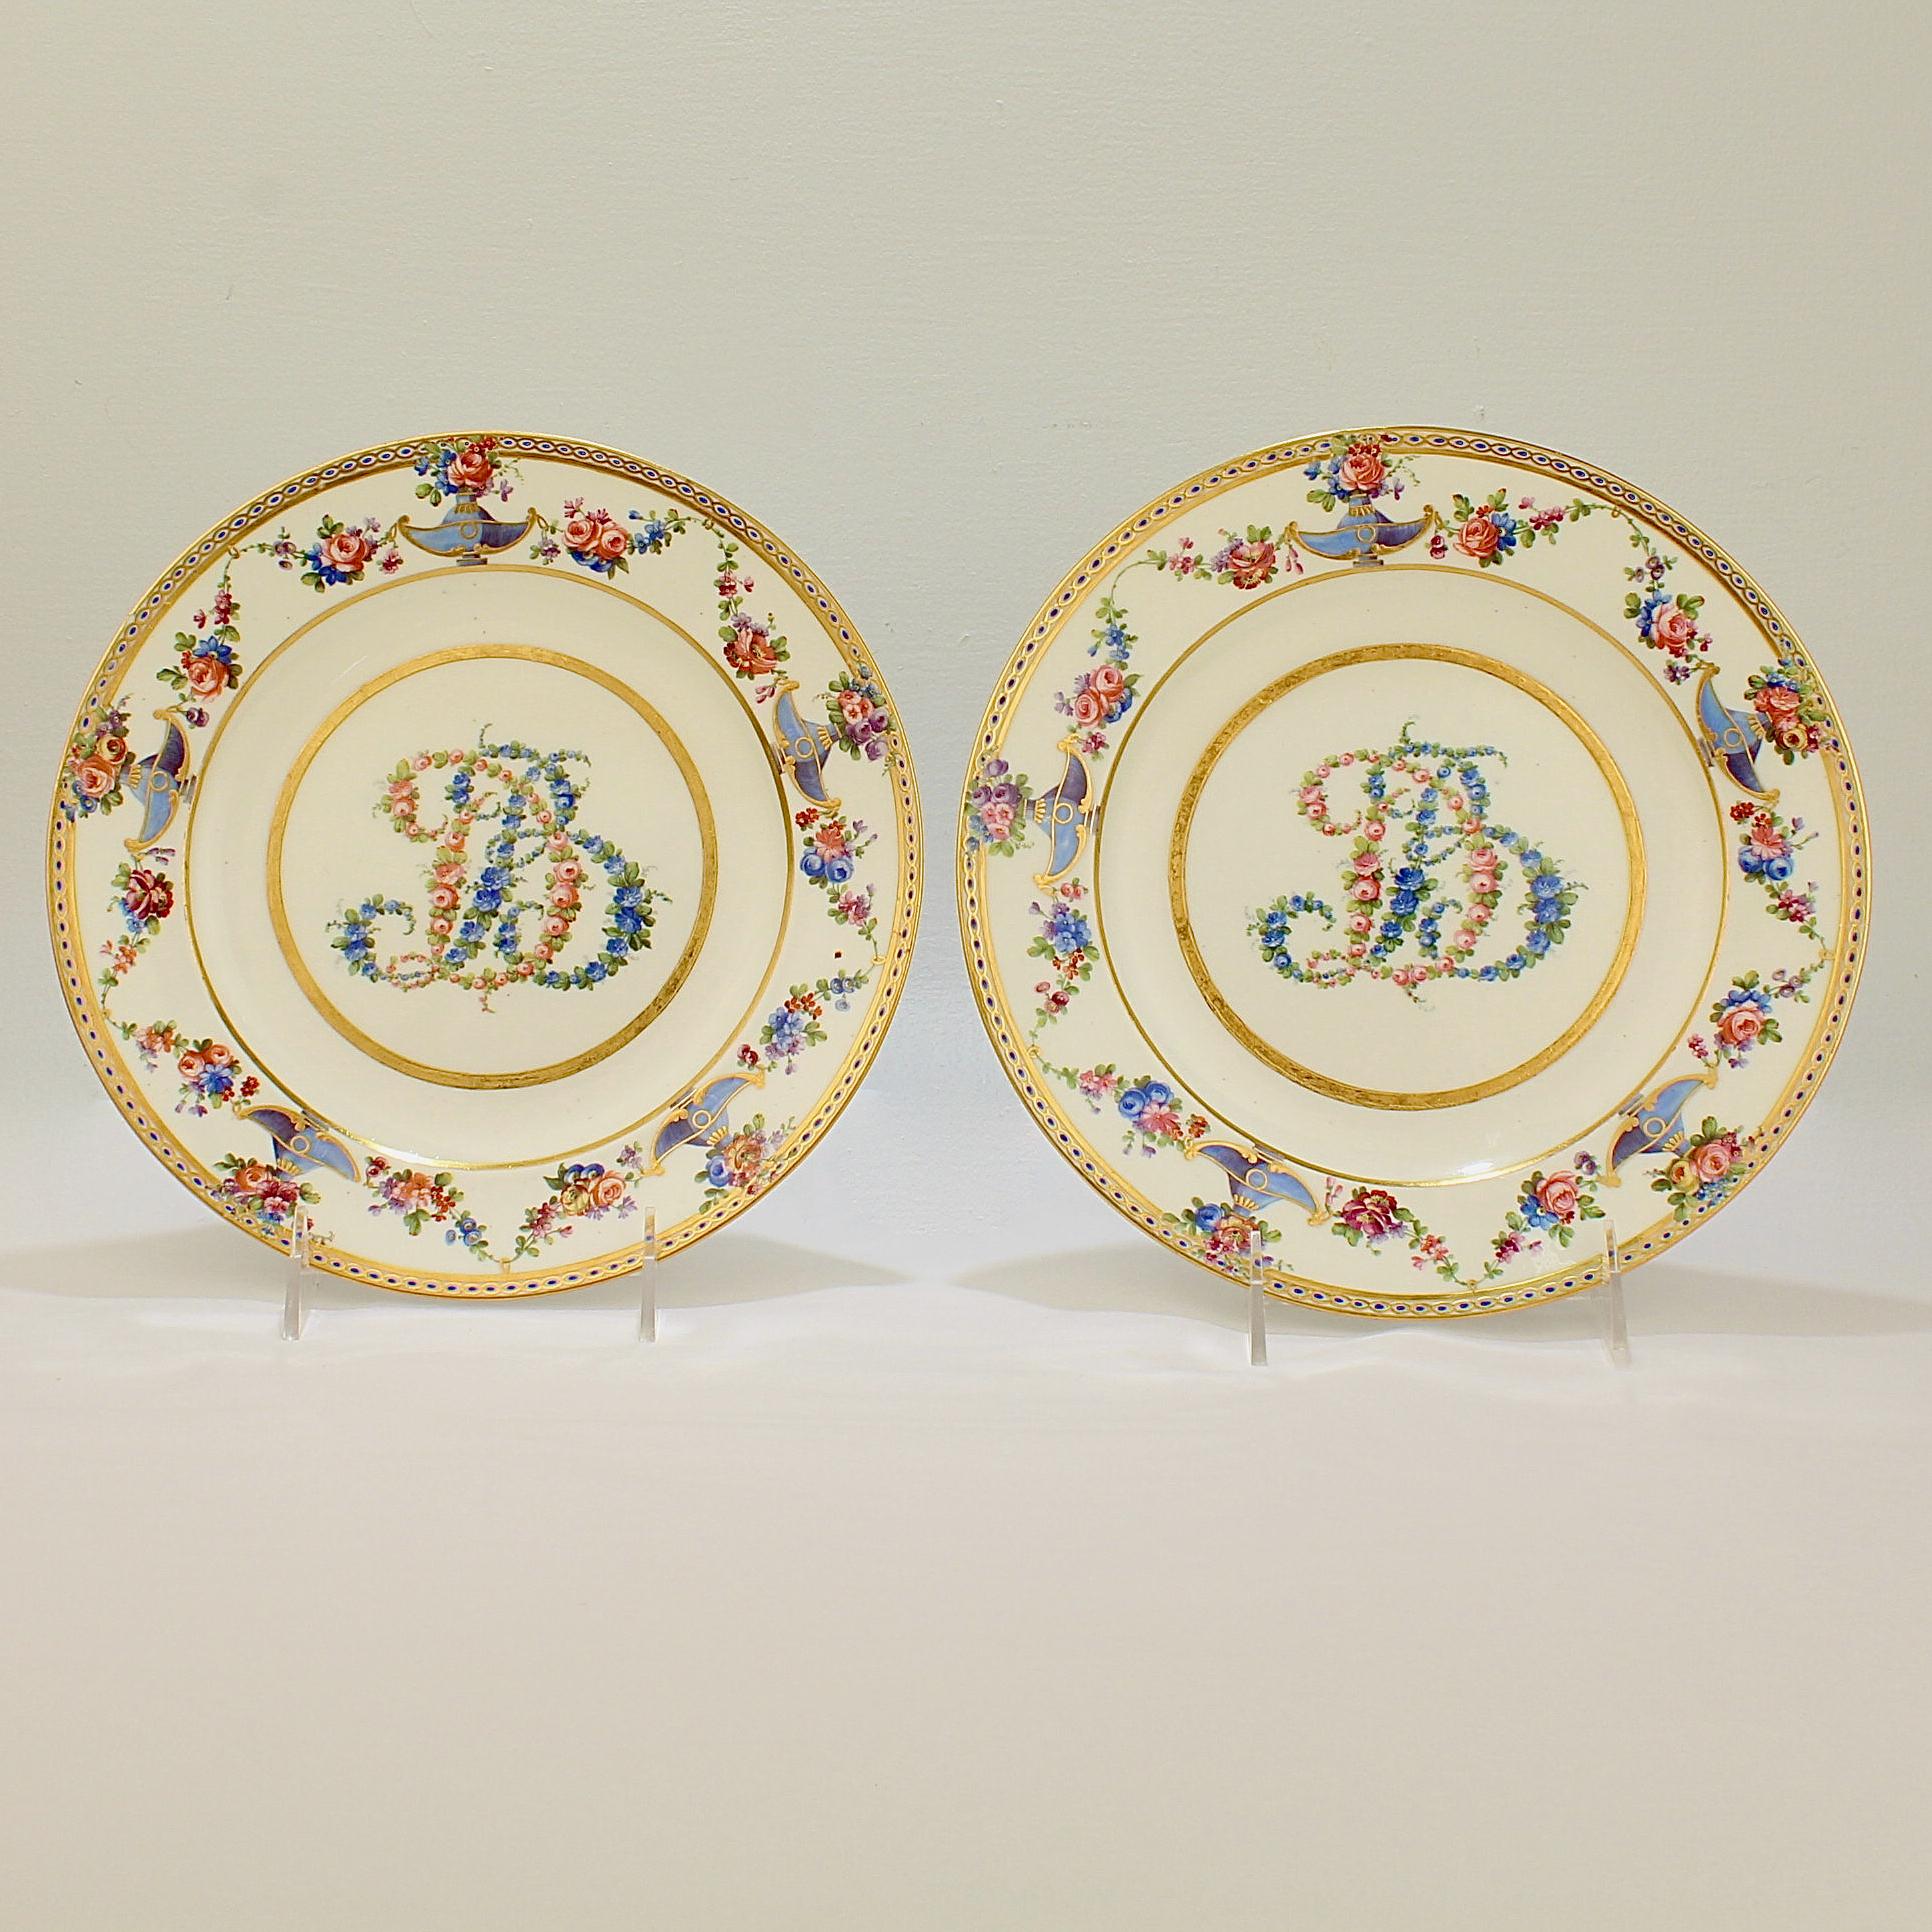 A very fine pair of 'Madame du Barry' Sèvres type porcelain plates.

Each decorated with a richly hand painted border of flower garlands, vines, and urns. 

The plates are a late 19th or early 20th century homage to the exceptional 18th century